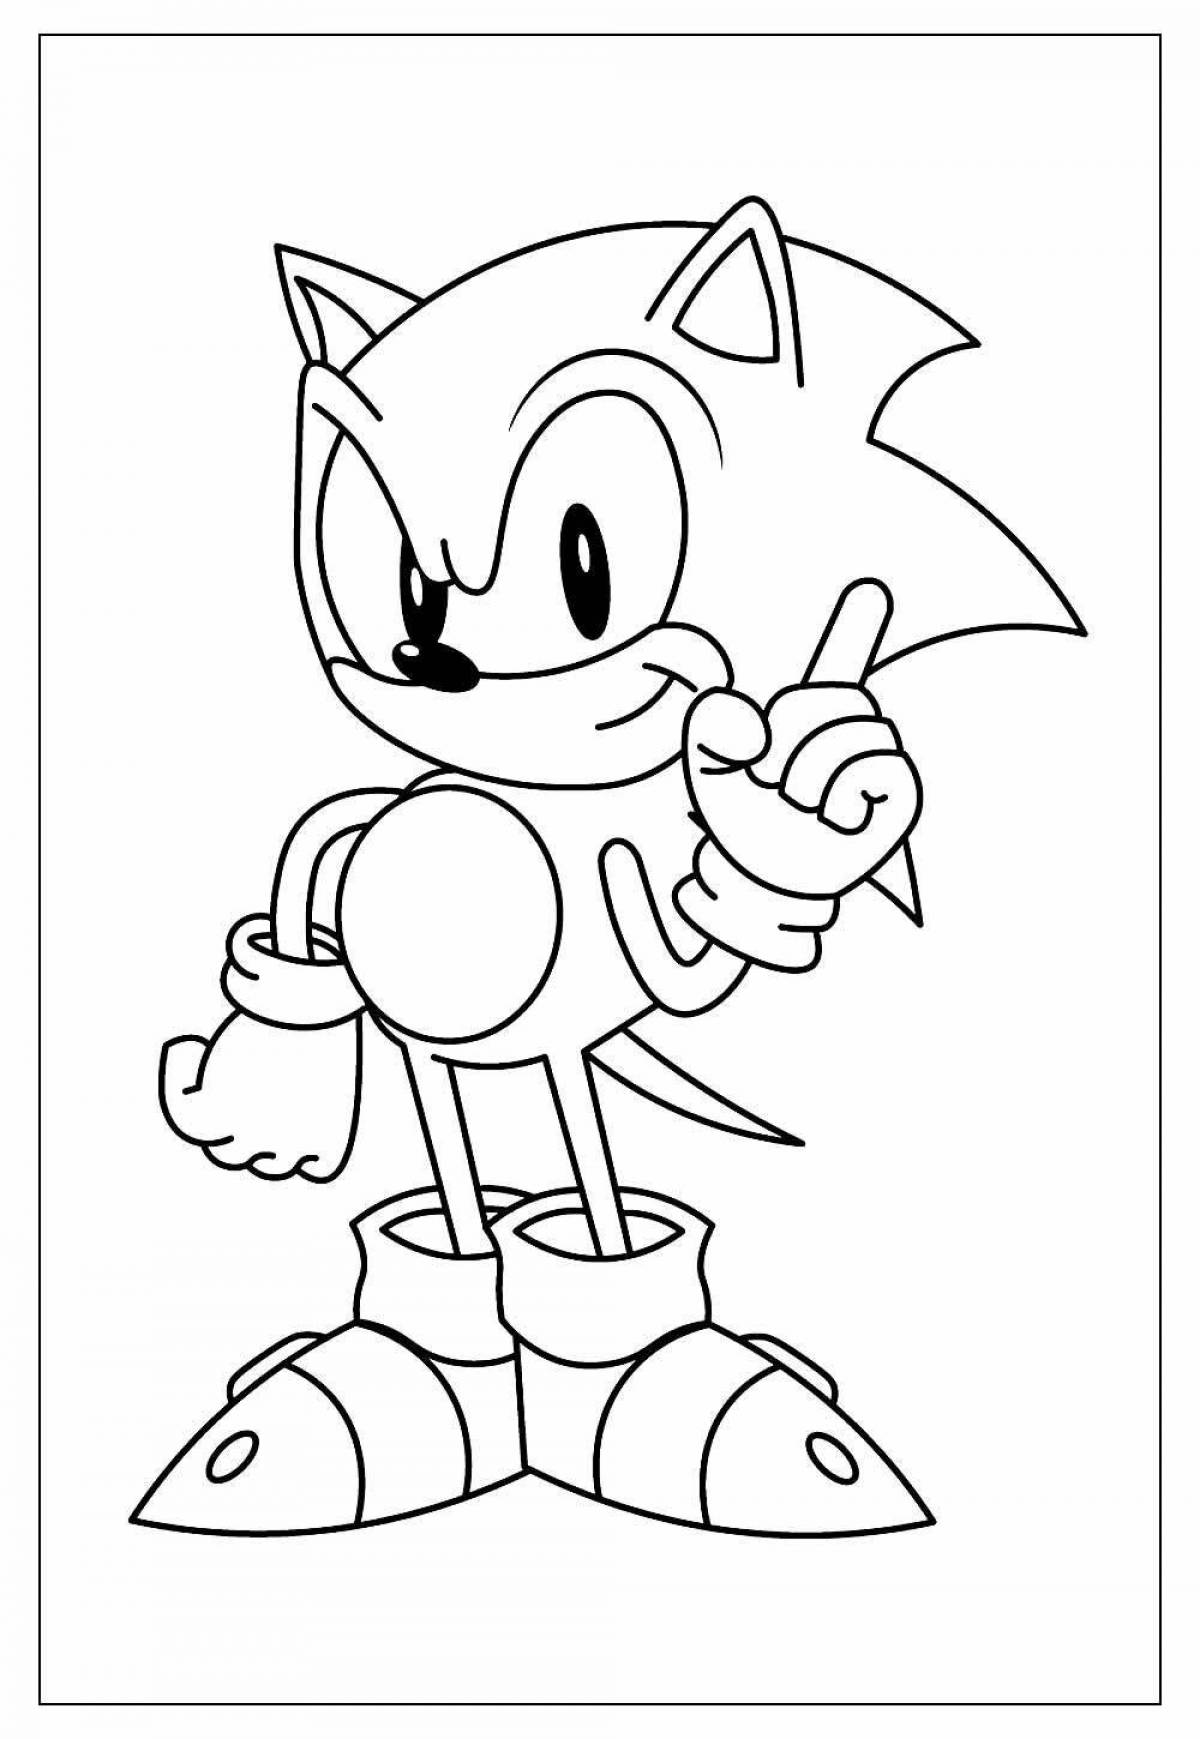 Sonic prime awesome coloring book